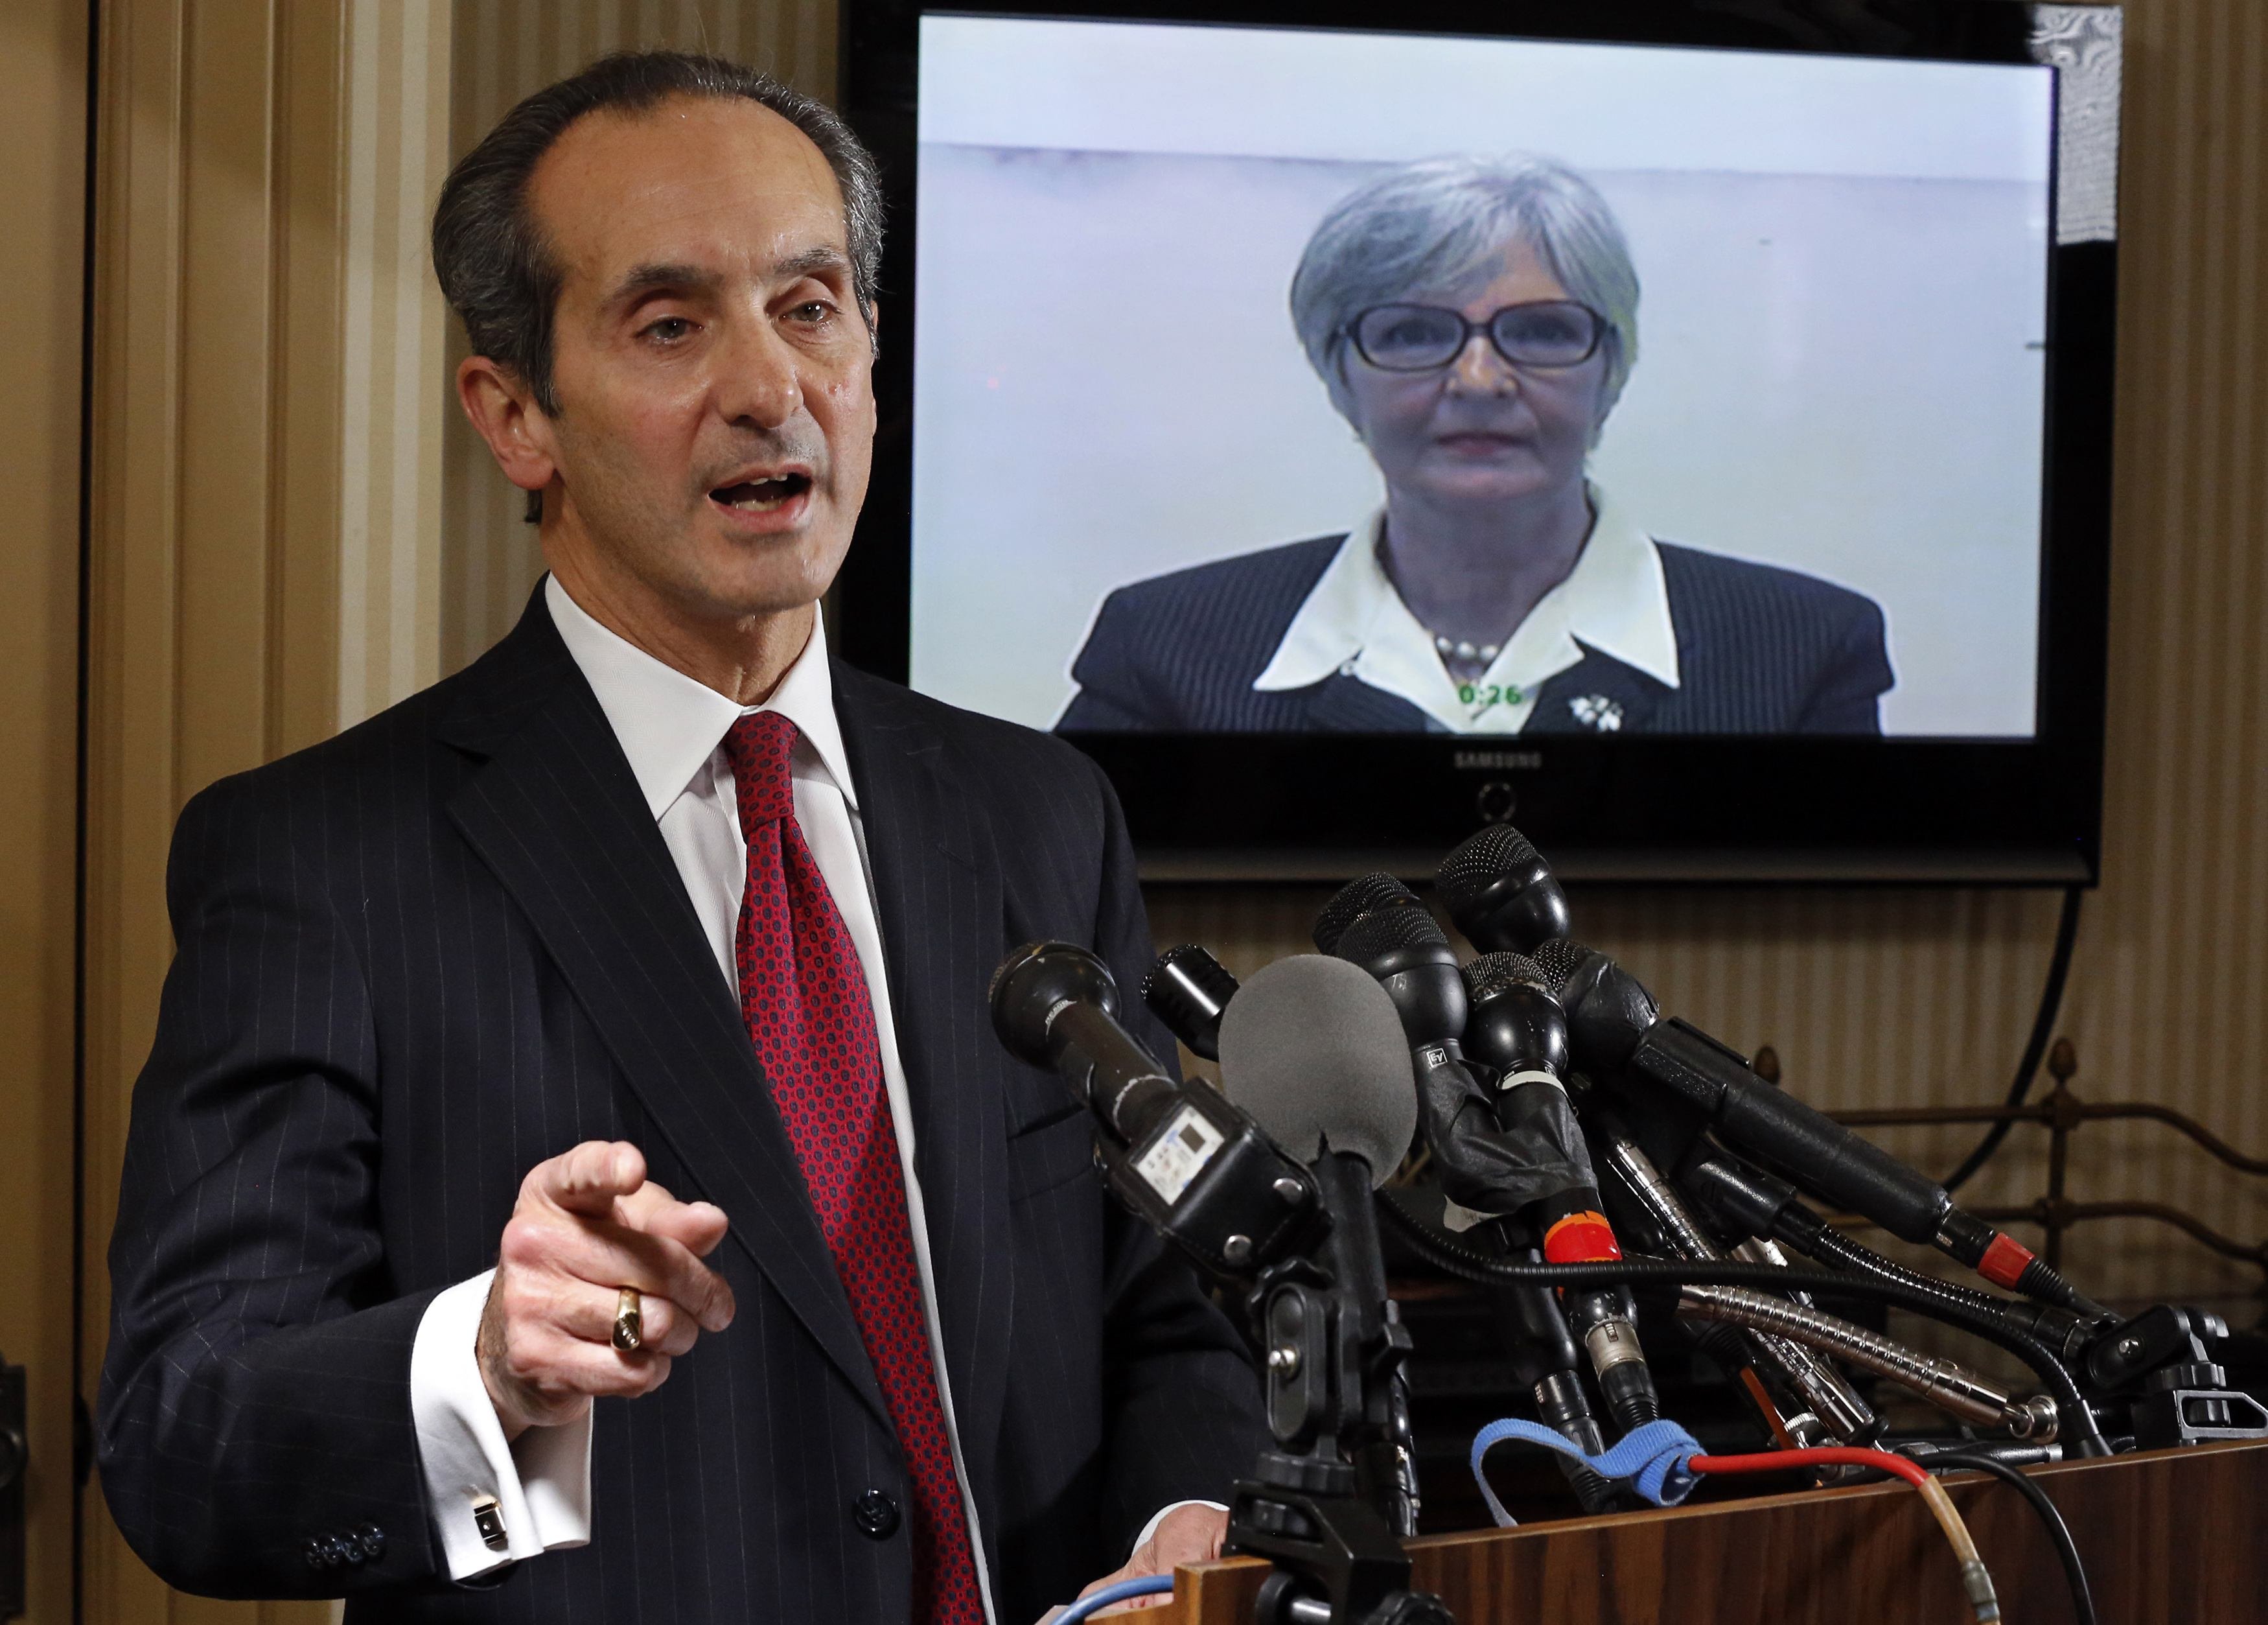 Tamara Green, the plaintiff in a defamation lawsuit claiming that she was "sexually assaulted by comedian Bill Cosby in the 1970s" watches by video link from California as her attorney Joseph Cammarata (L) speaks about the suit that they have filed to a news conference in Washington on Dec. 10, 2014. (Jim Bourg—Reuters)